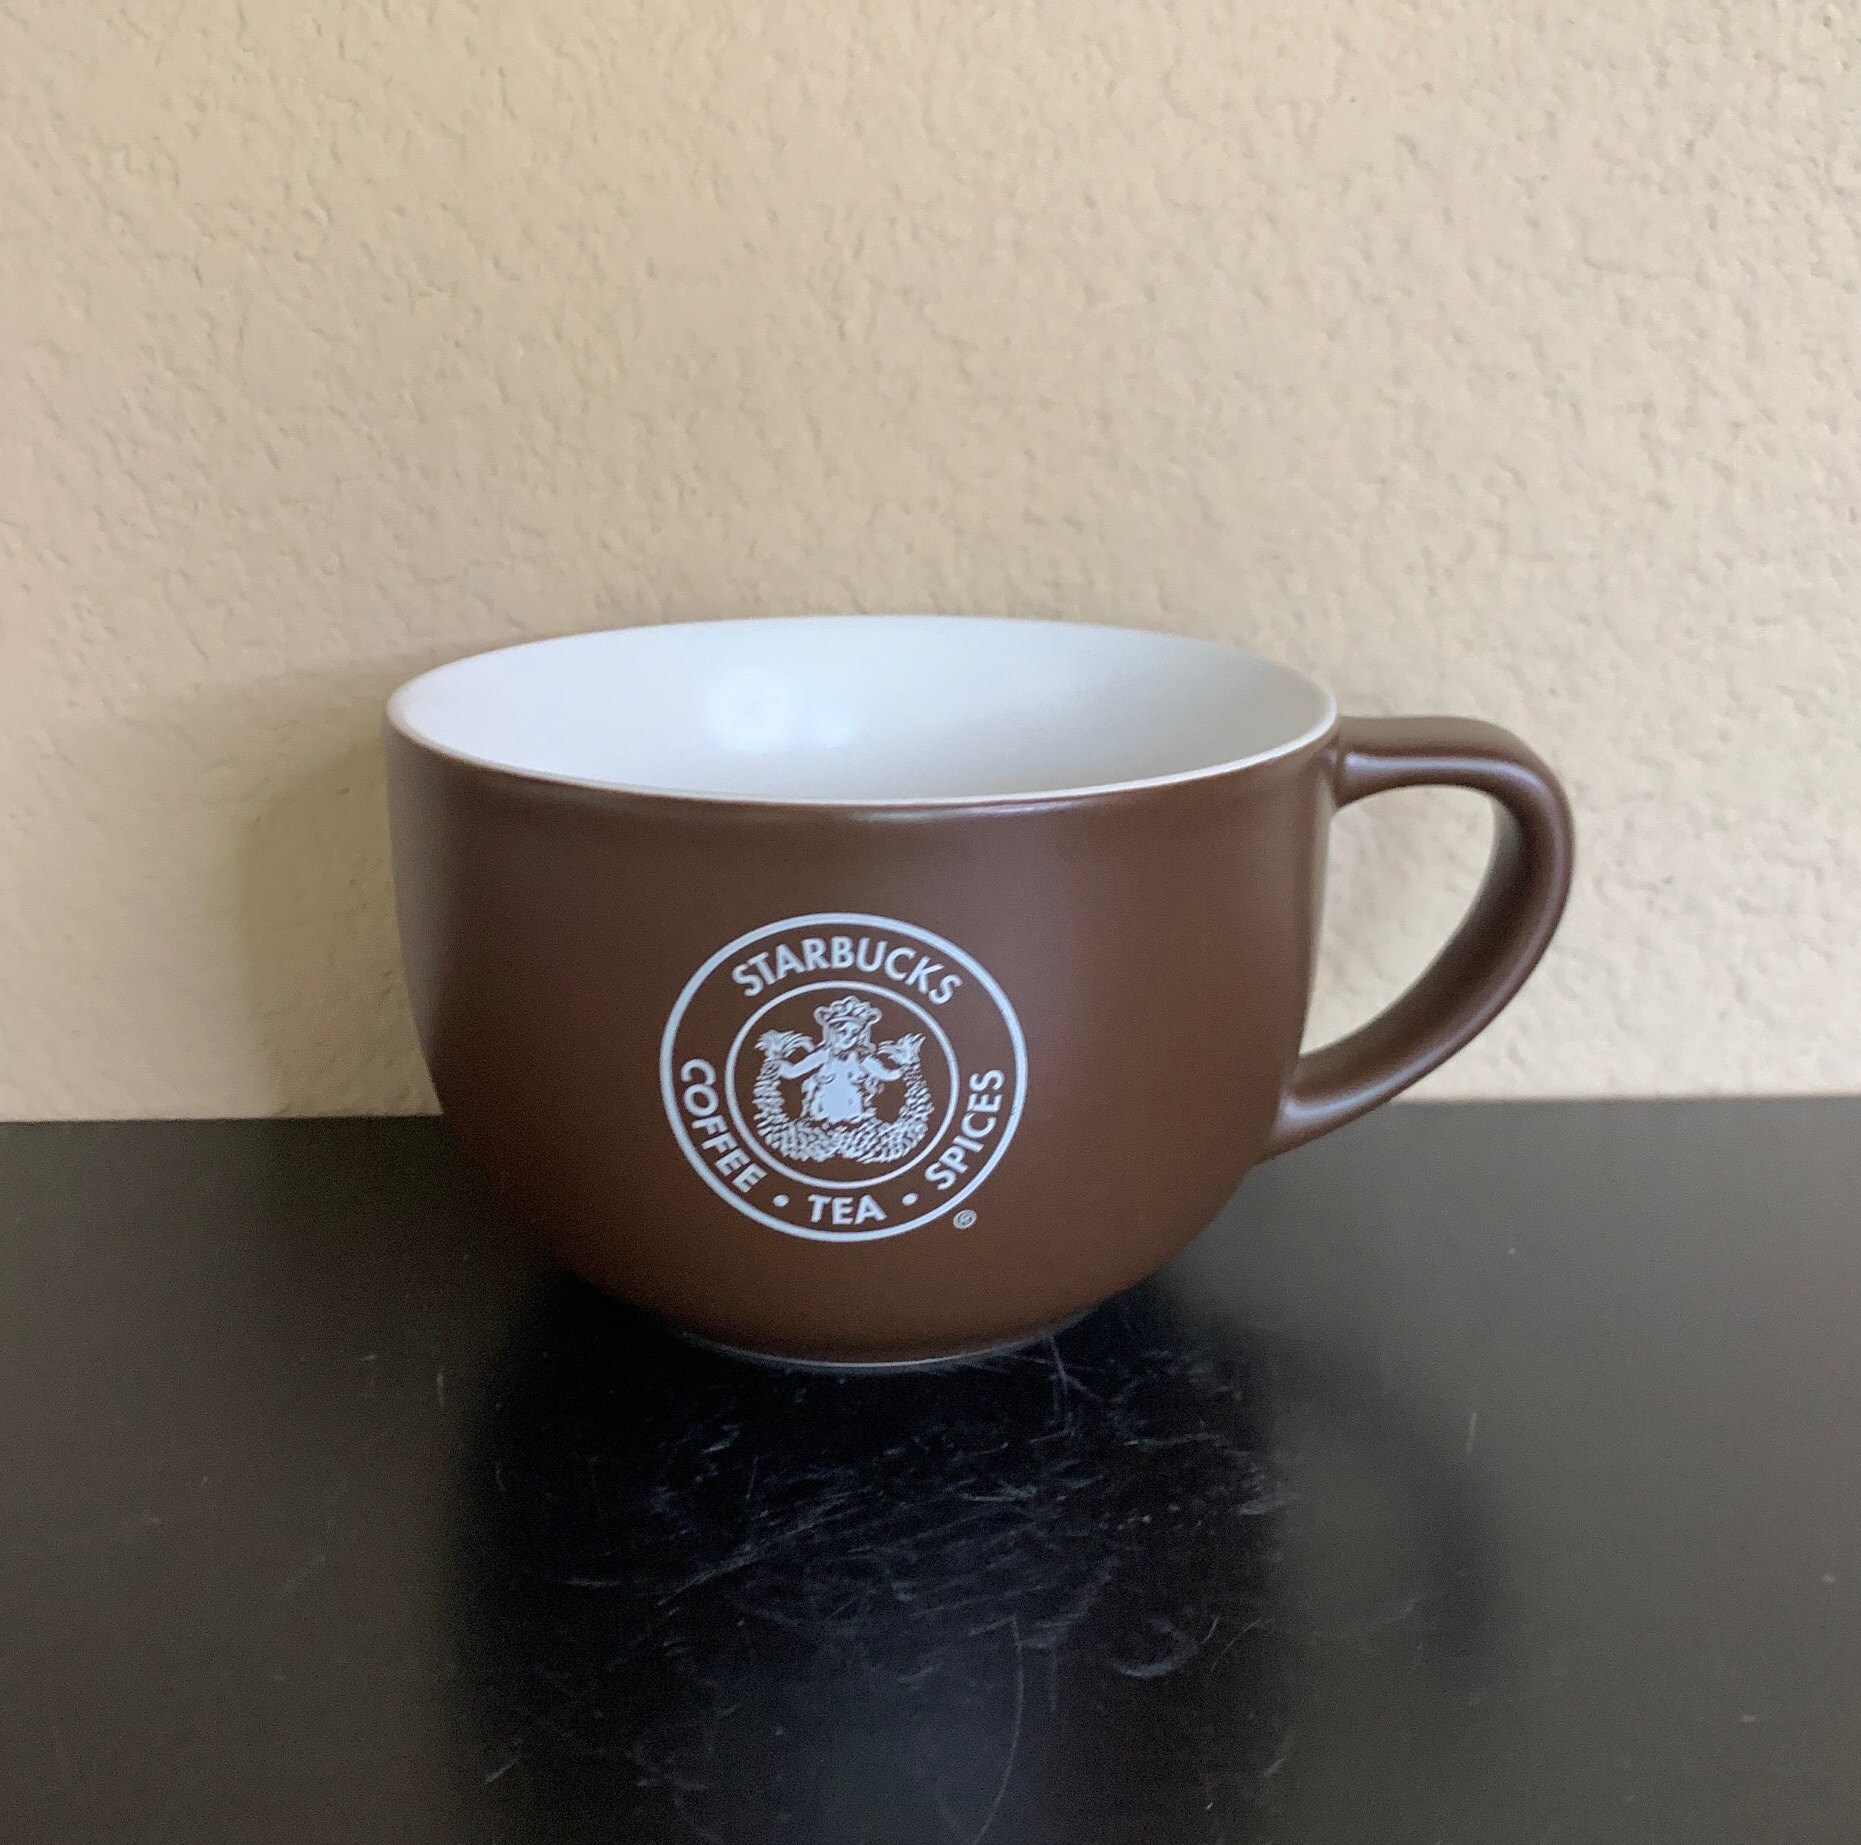 Starbucks Pike Place Local Collection Double Wall Ceramic Travel Mug –  Seattle Xpresso